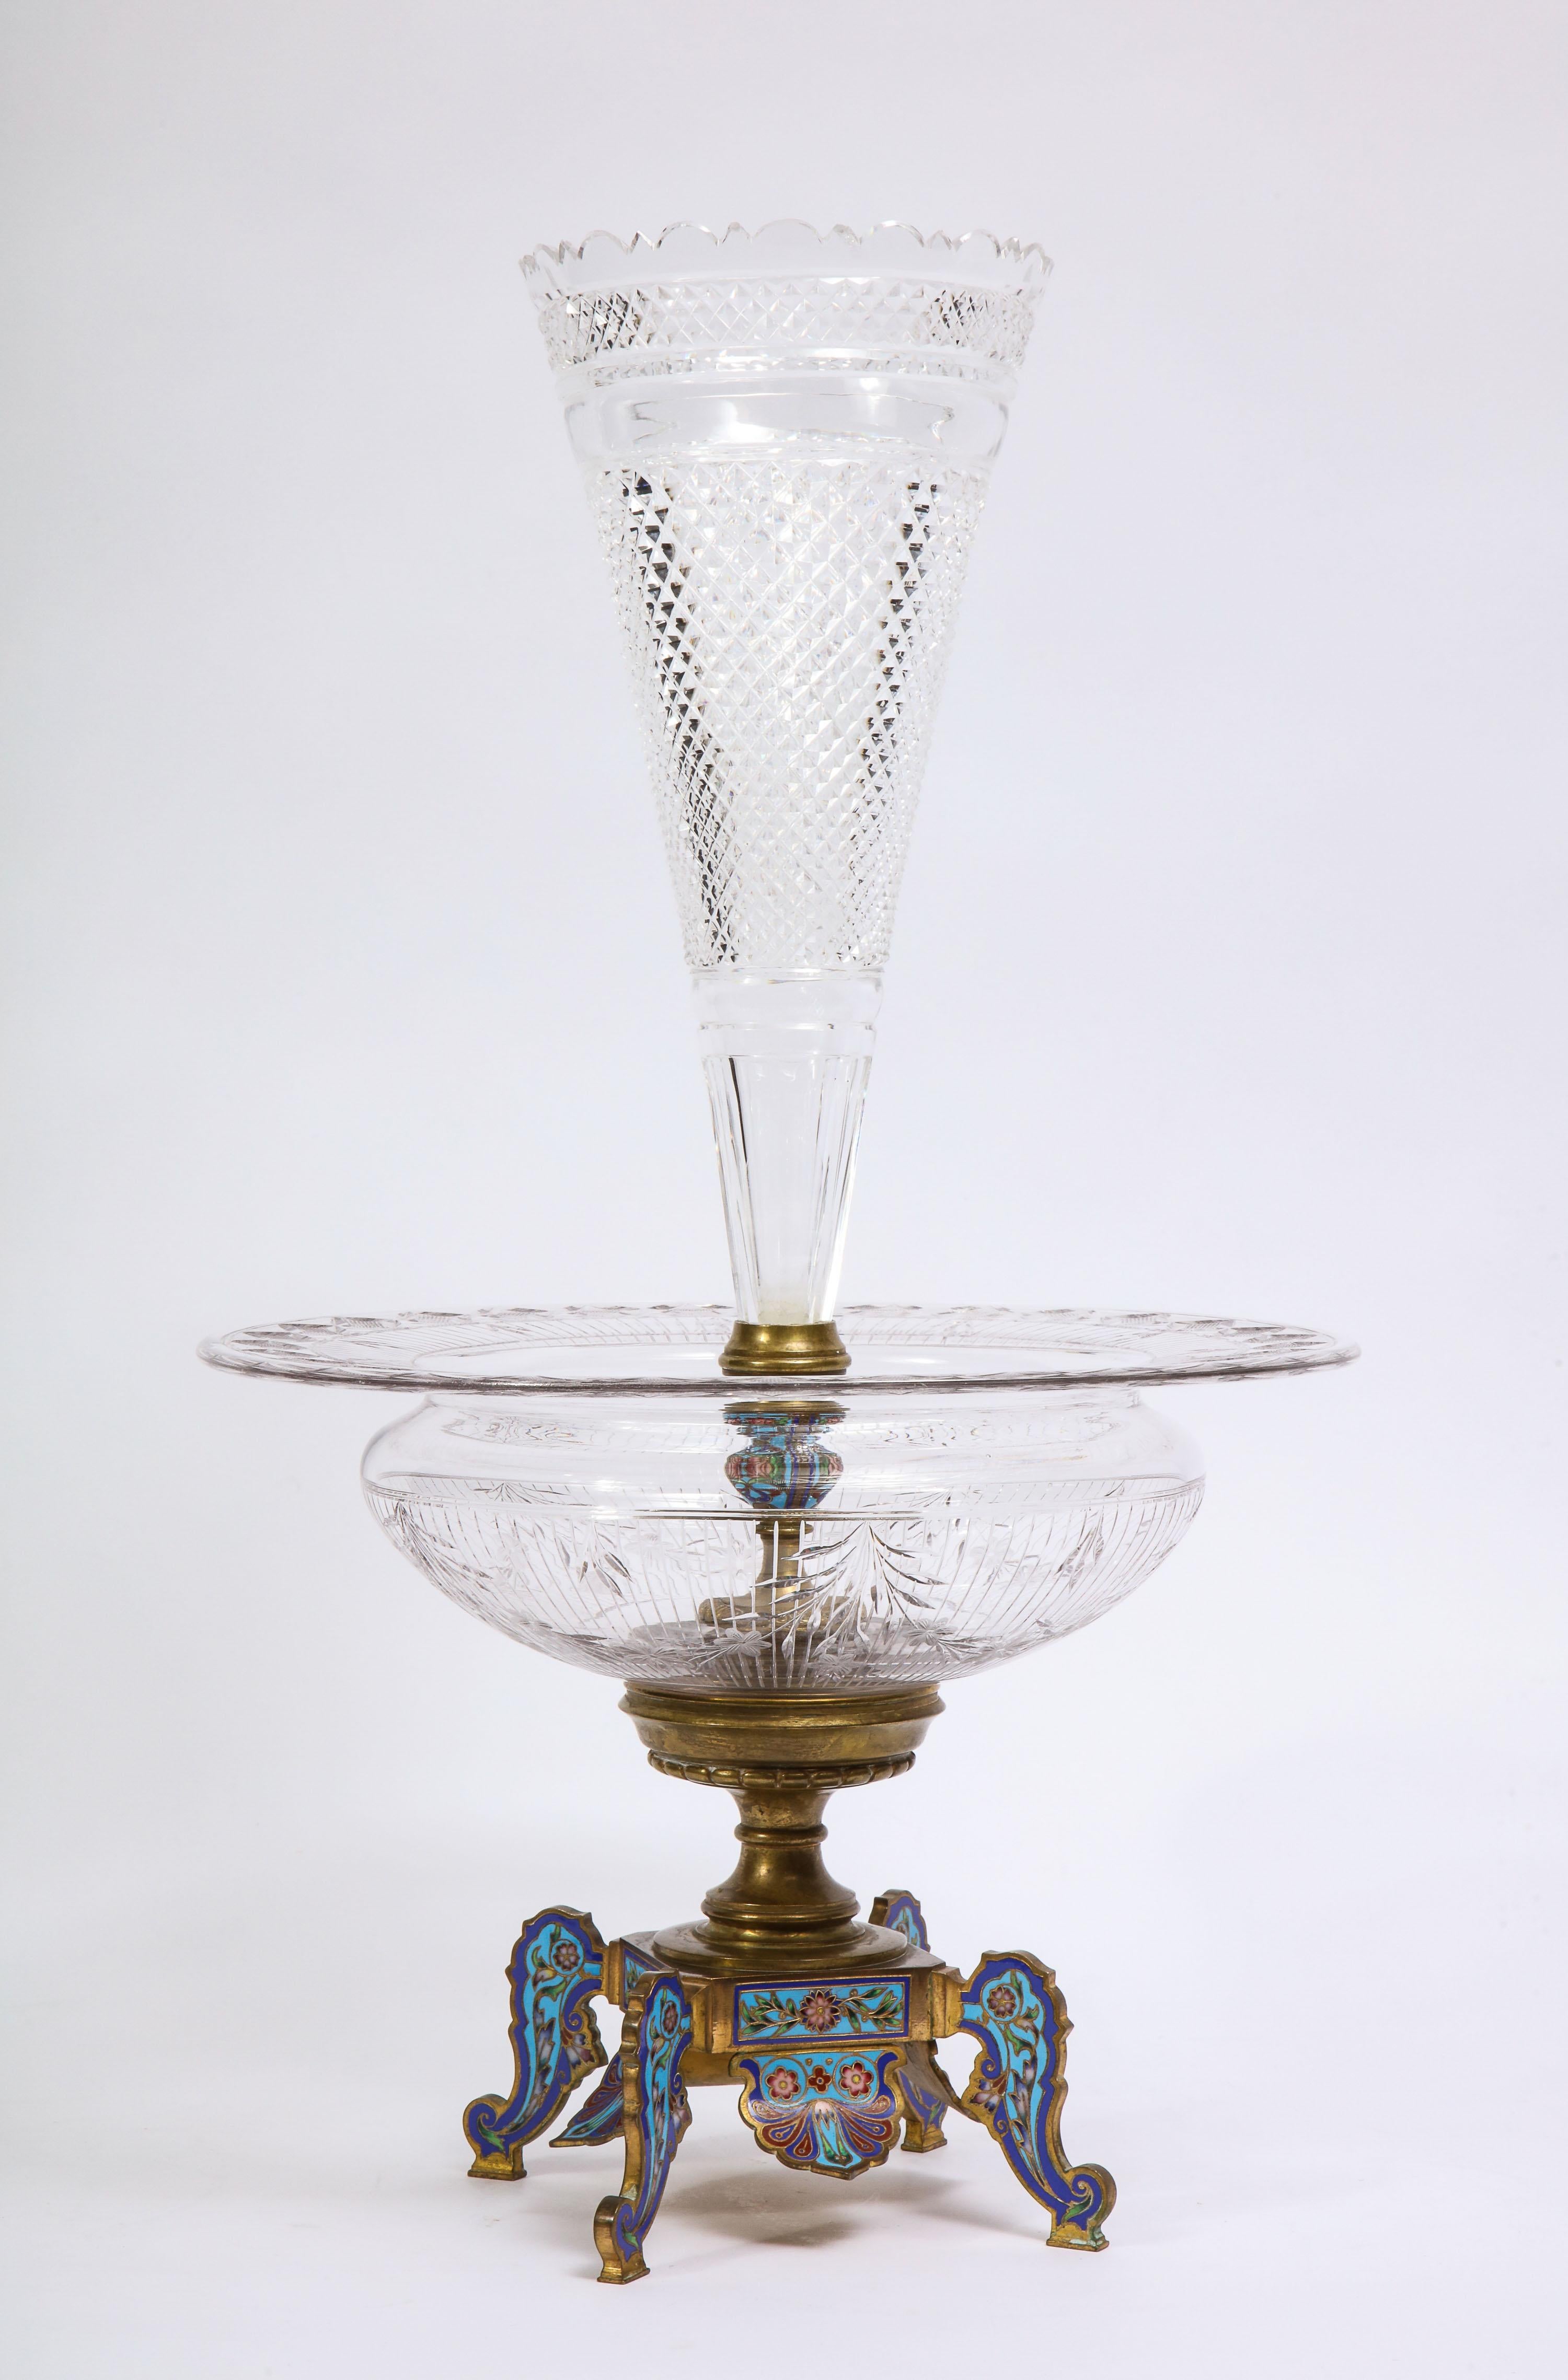 A unique and quite beautiful Orientalist style hand-diamond cut and Champleve enamel signed Baccarat centerpiece/floral vase. This is a truly unique centerpiece, as it serves dual purpose; it can be used as a gorgeous centerpiece for fruits, nuts,